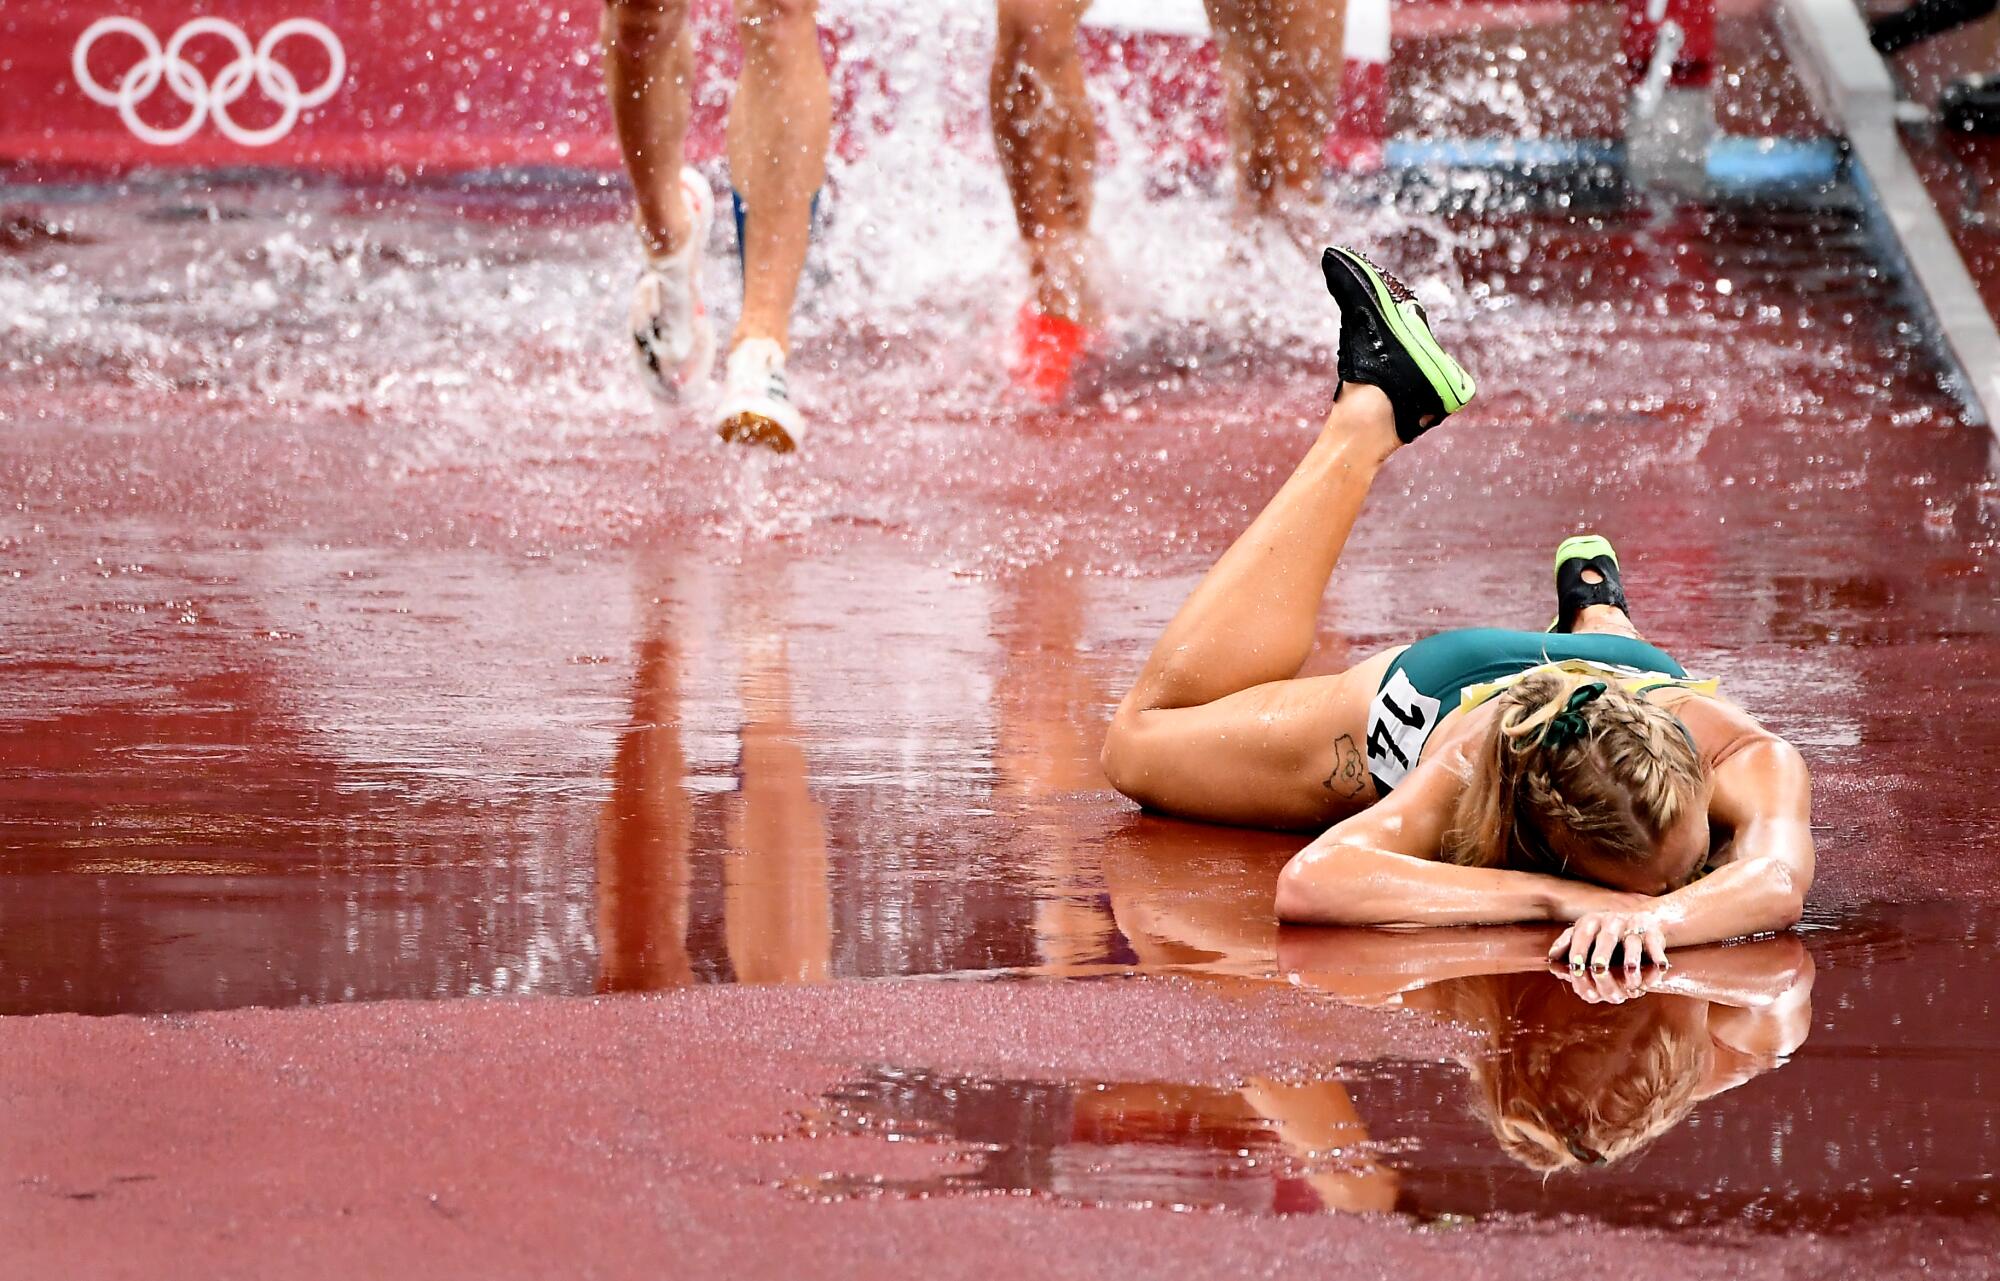 Australia's Genevieve Gregson injures her ankle during the women's 3000m steeplechase